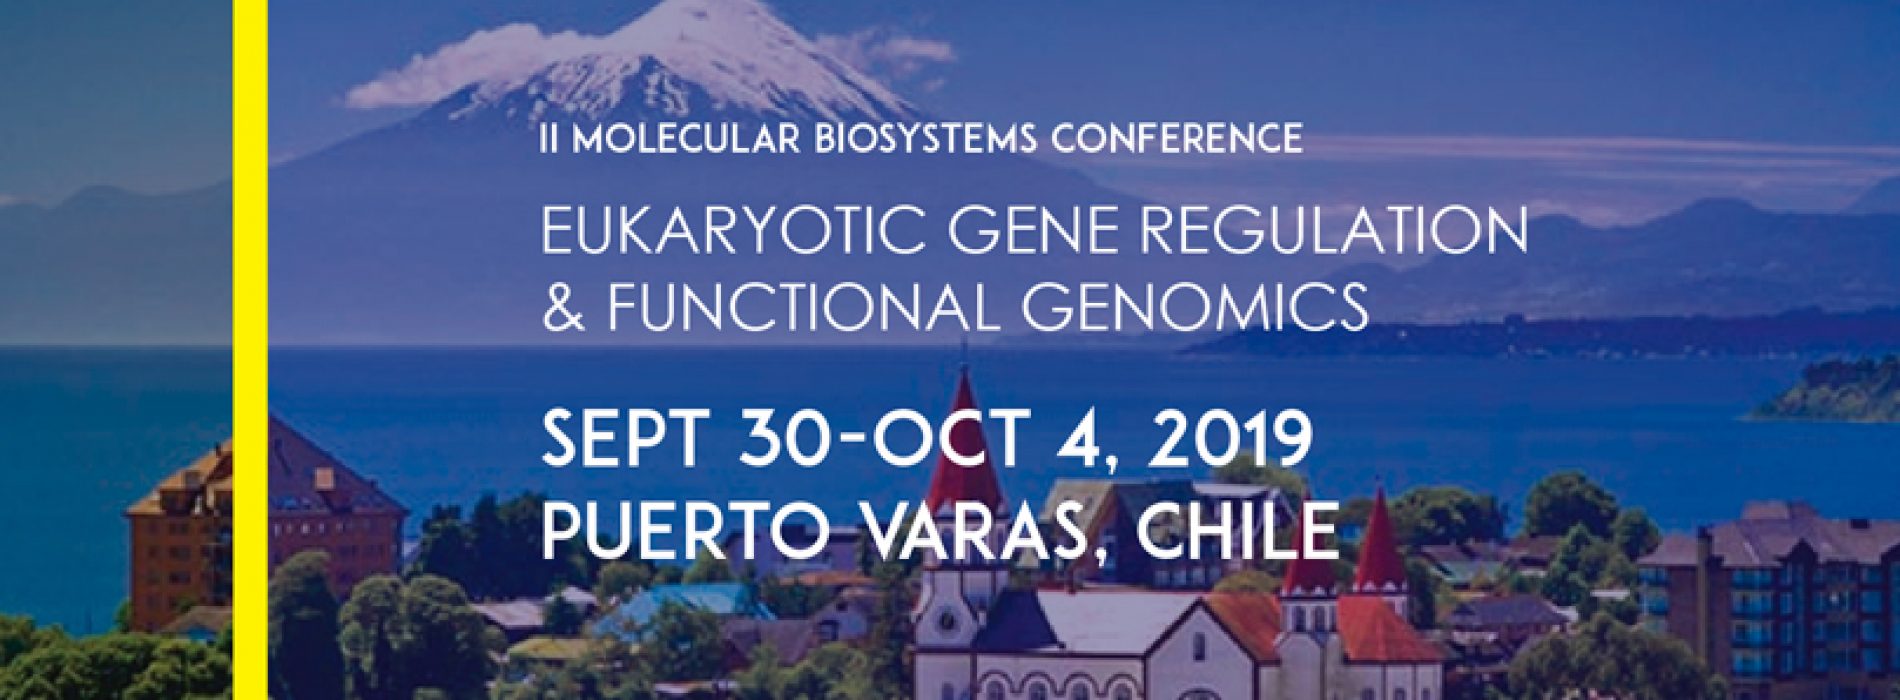 Only one week left to submit your abstract – Molecular Biosystems Conference on Eukaryotic Gene Regulation & Functional Genomics (Sept 30-Oct 4 2019)